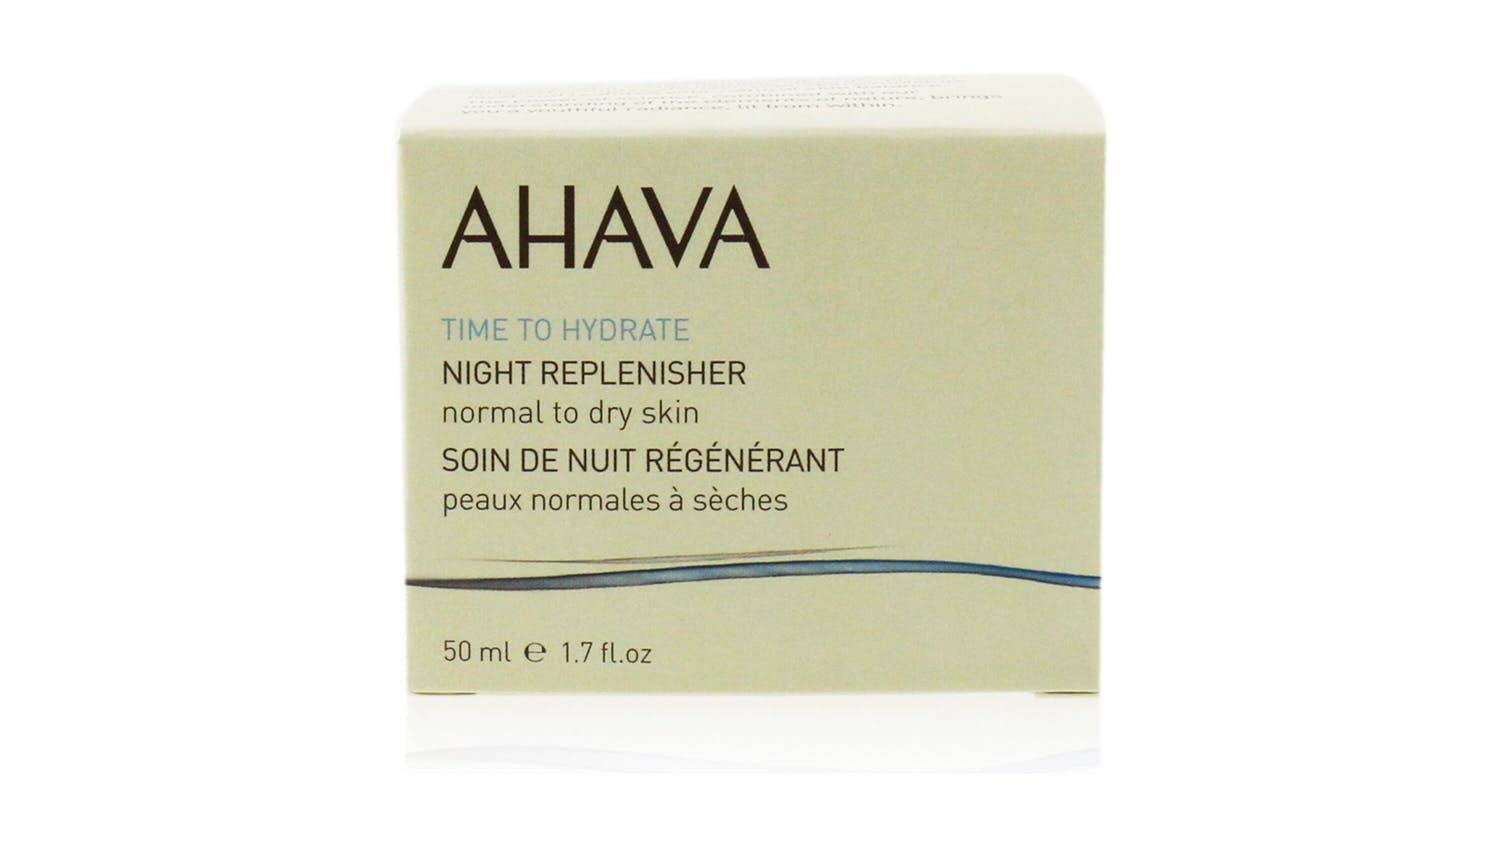 Ahava Time To Hydrate Night Replenisher (Normal to Dry Skin) - 50ml/1.7oz